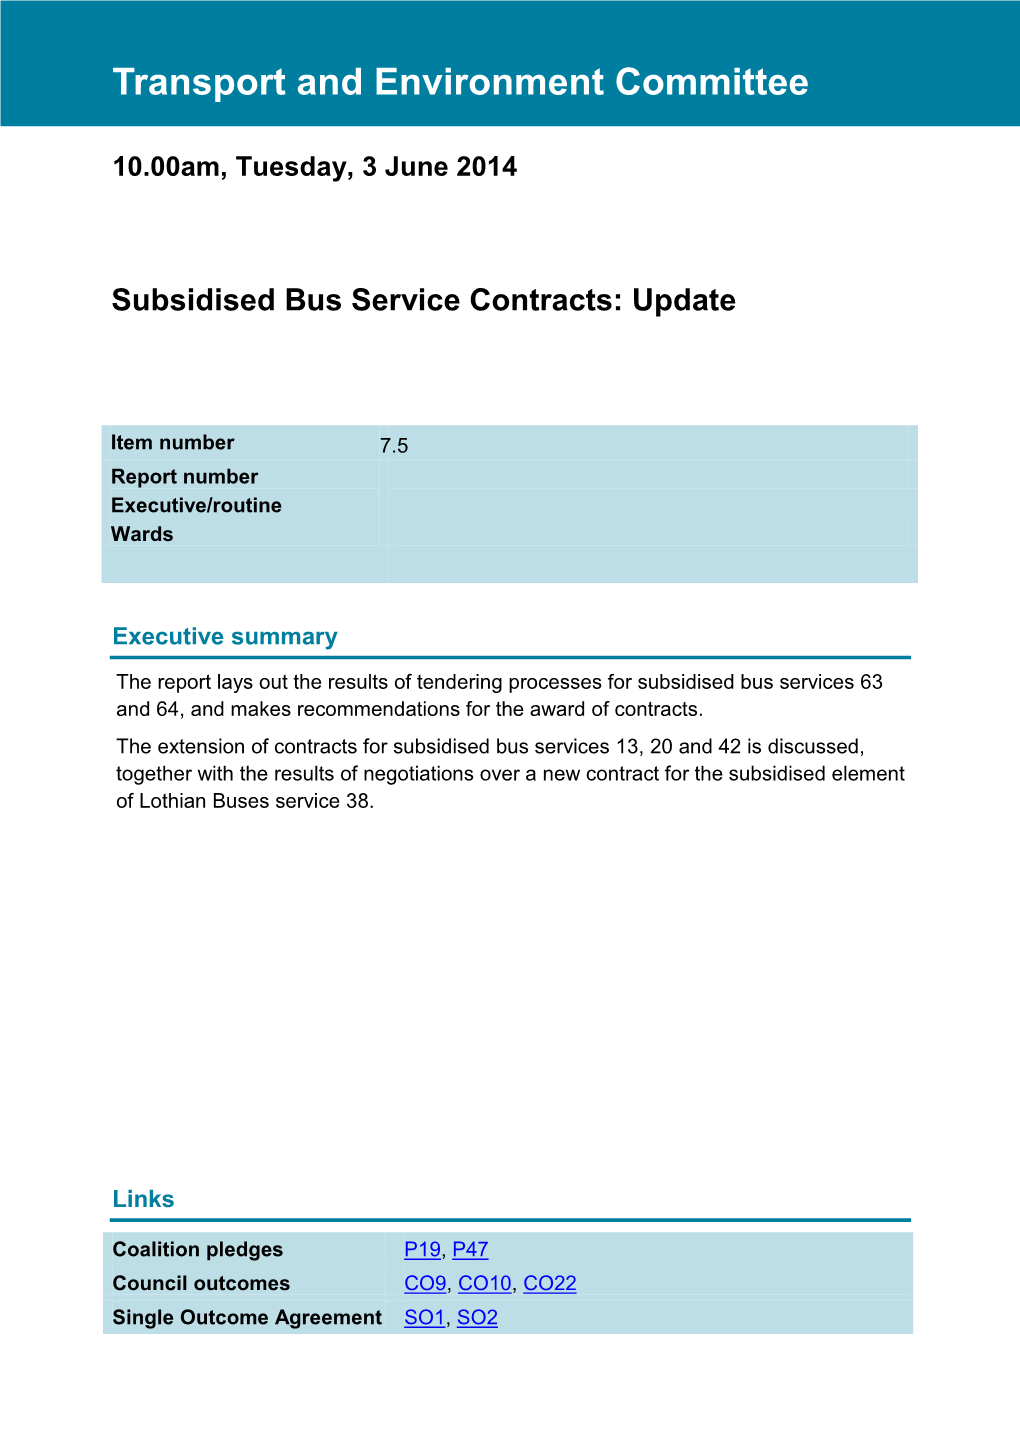 Subsidised Bus Service Contracts: Update